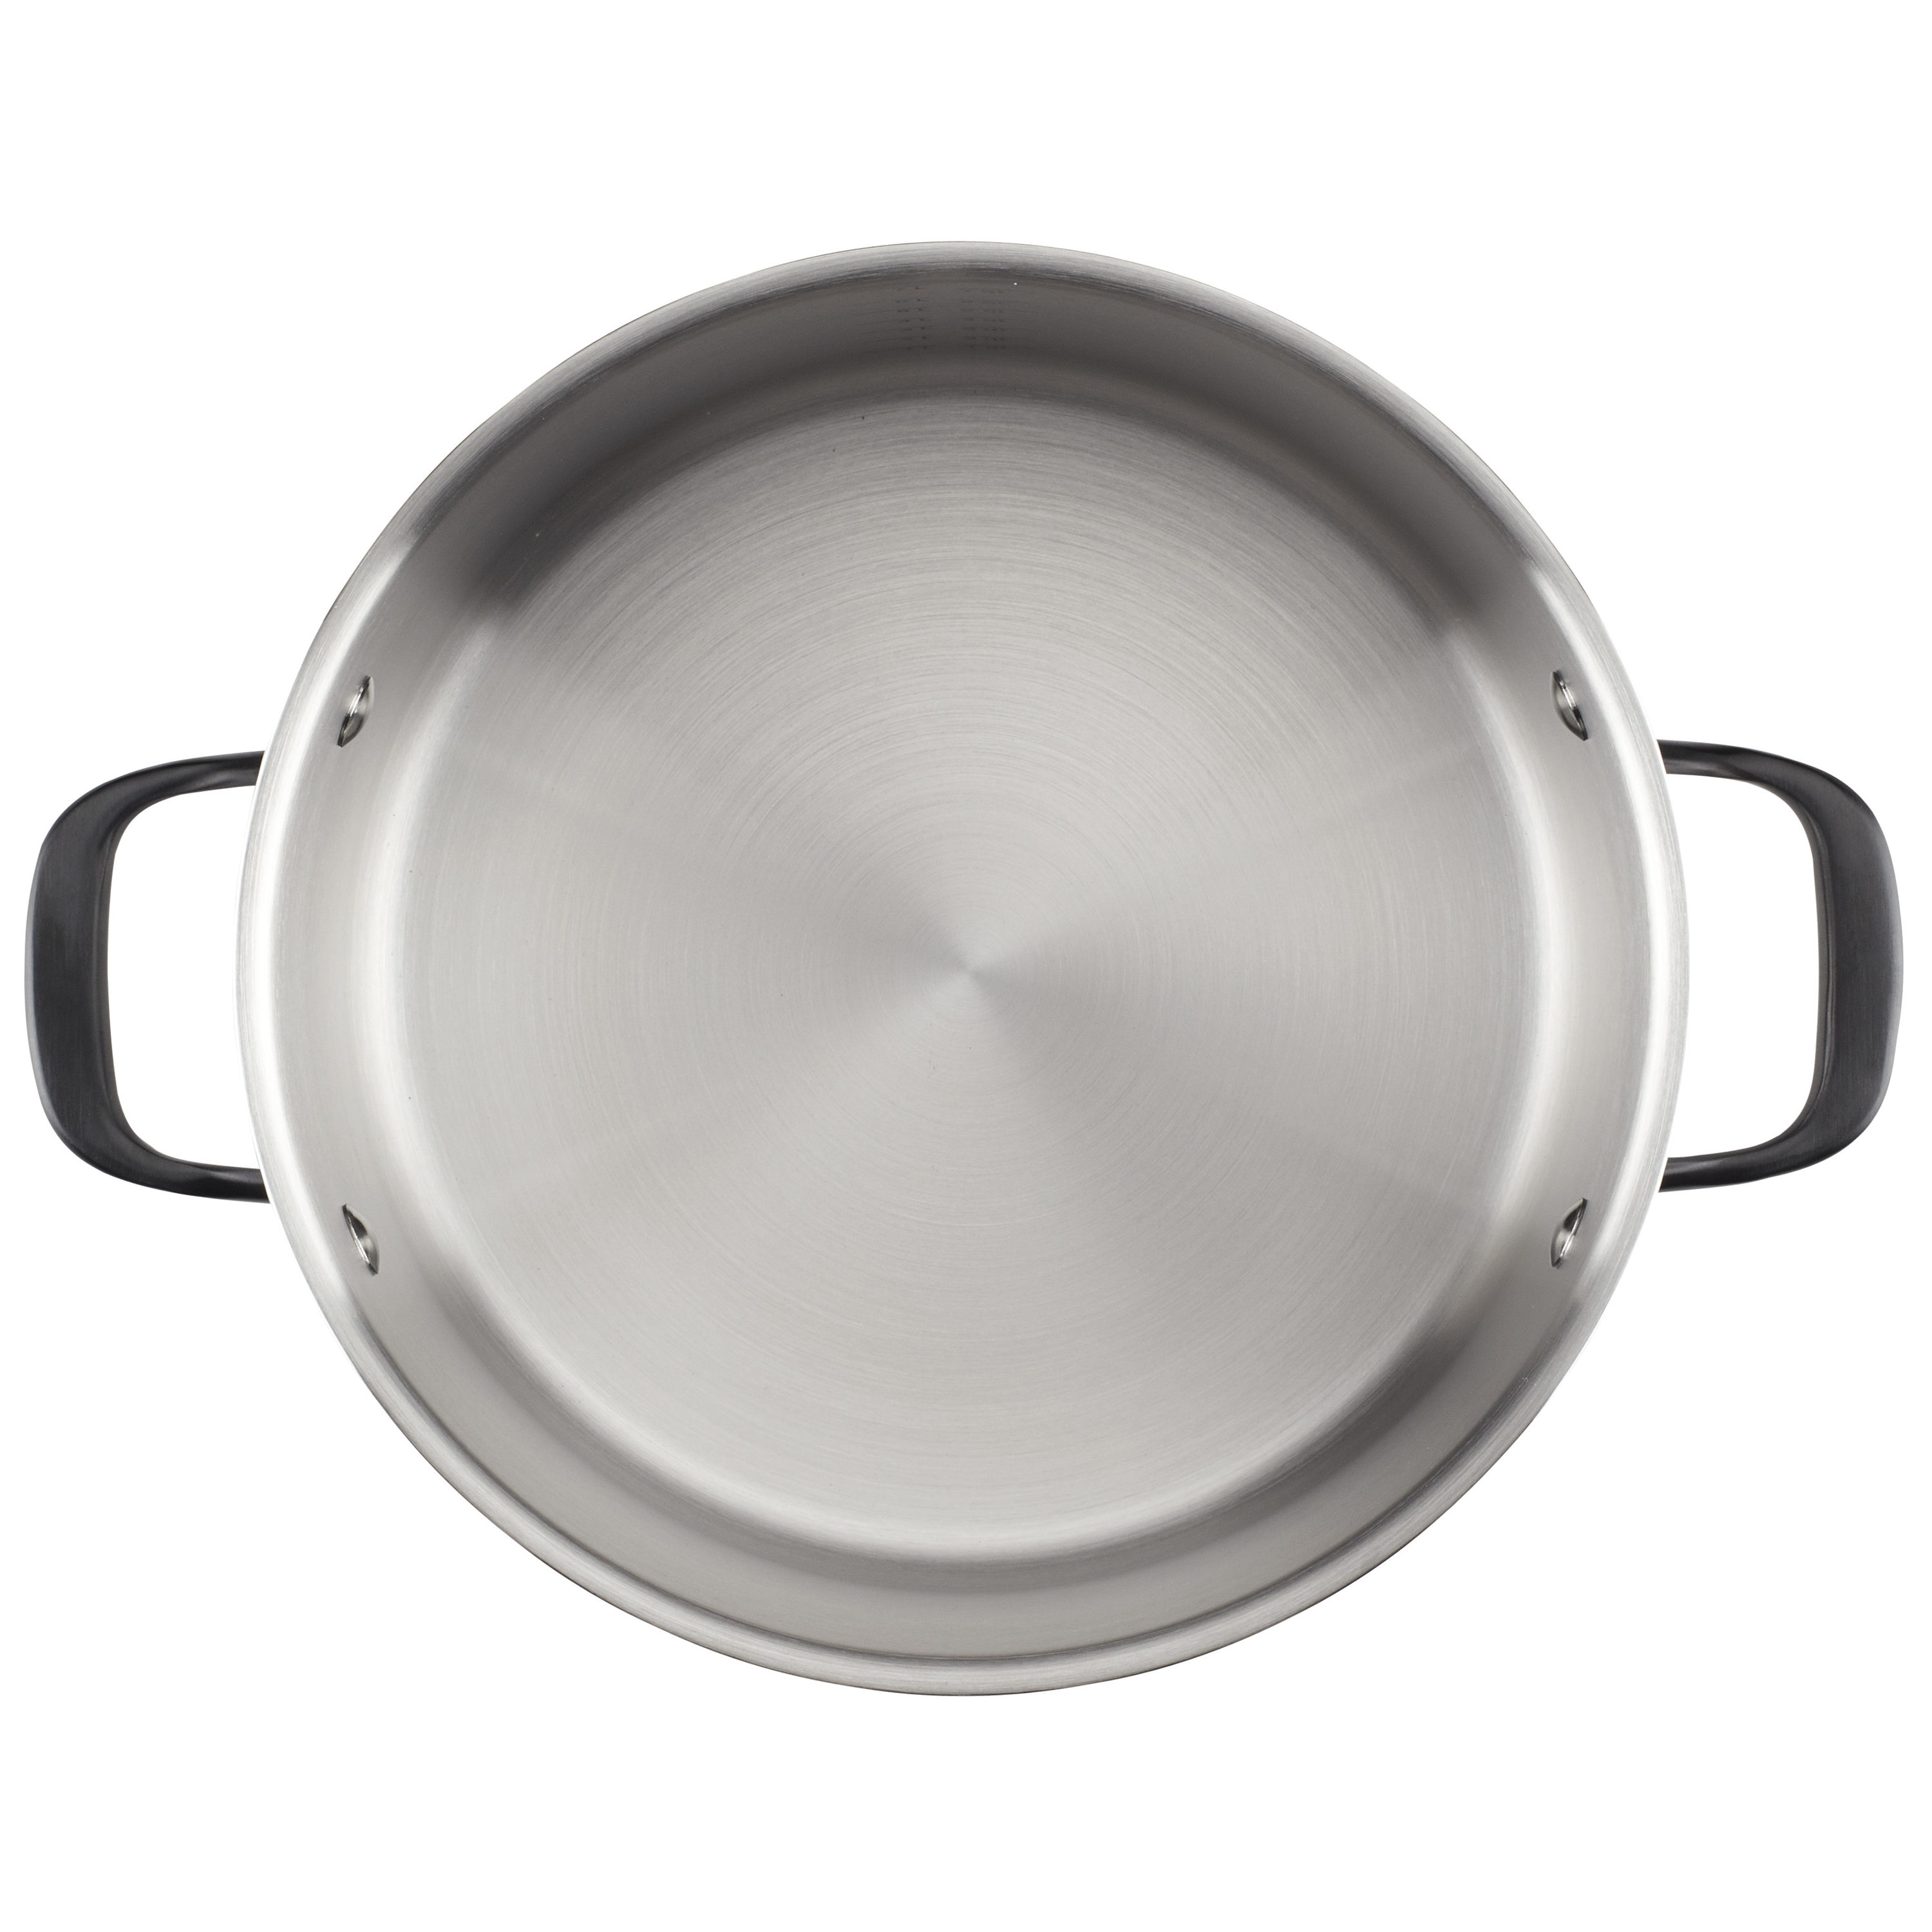 KitchenAid 3 qt 5-Ply Clad Stainless Steel Saucepan with Lid